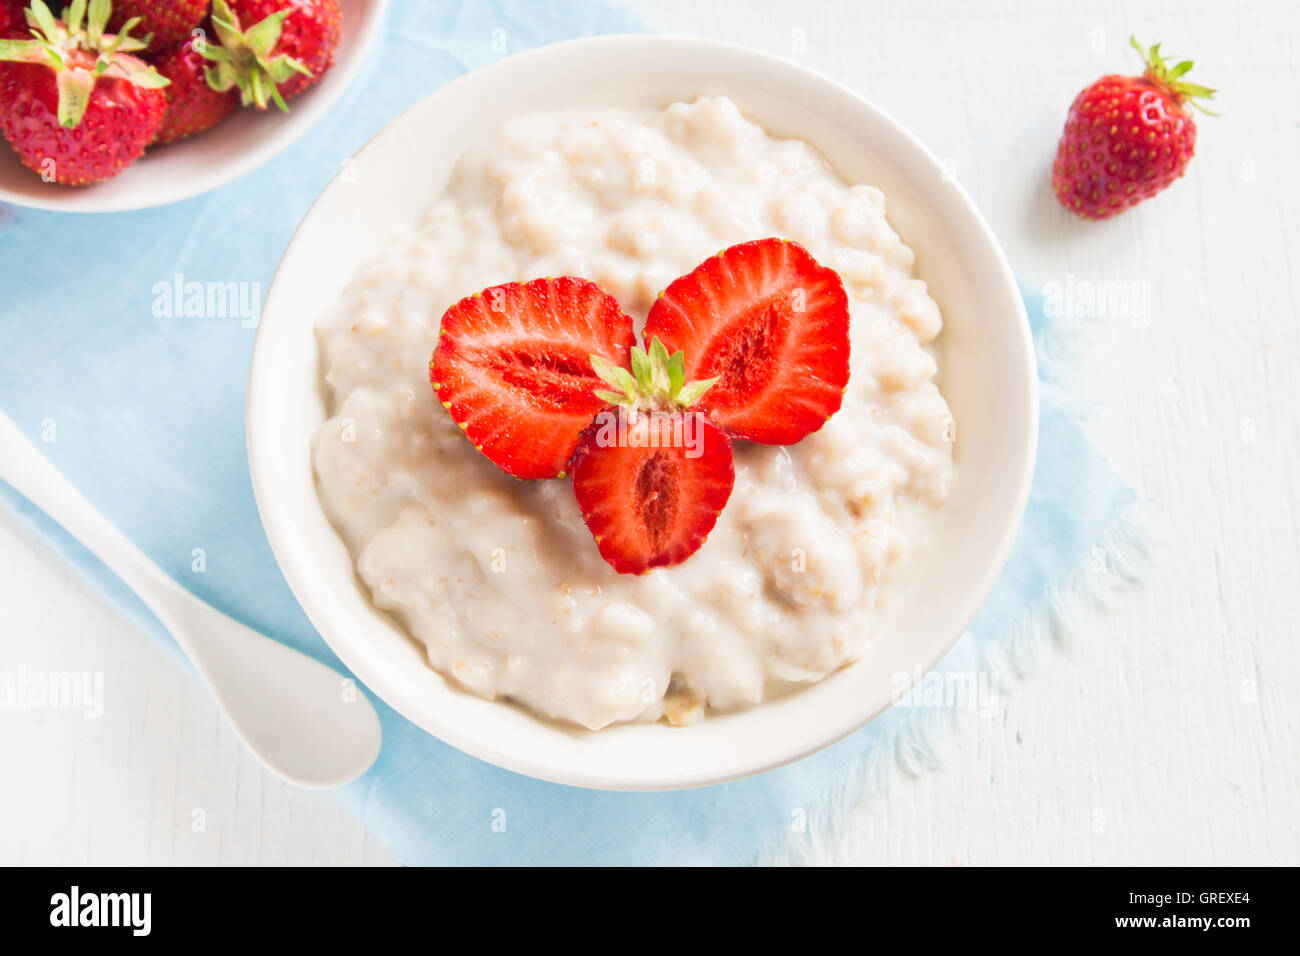 Oatmeal porridge with strawberries in bowl for healthy breakfast Stock Photo